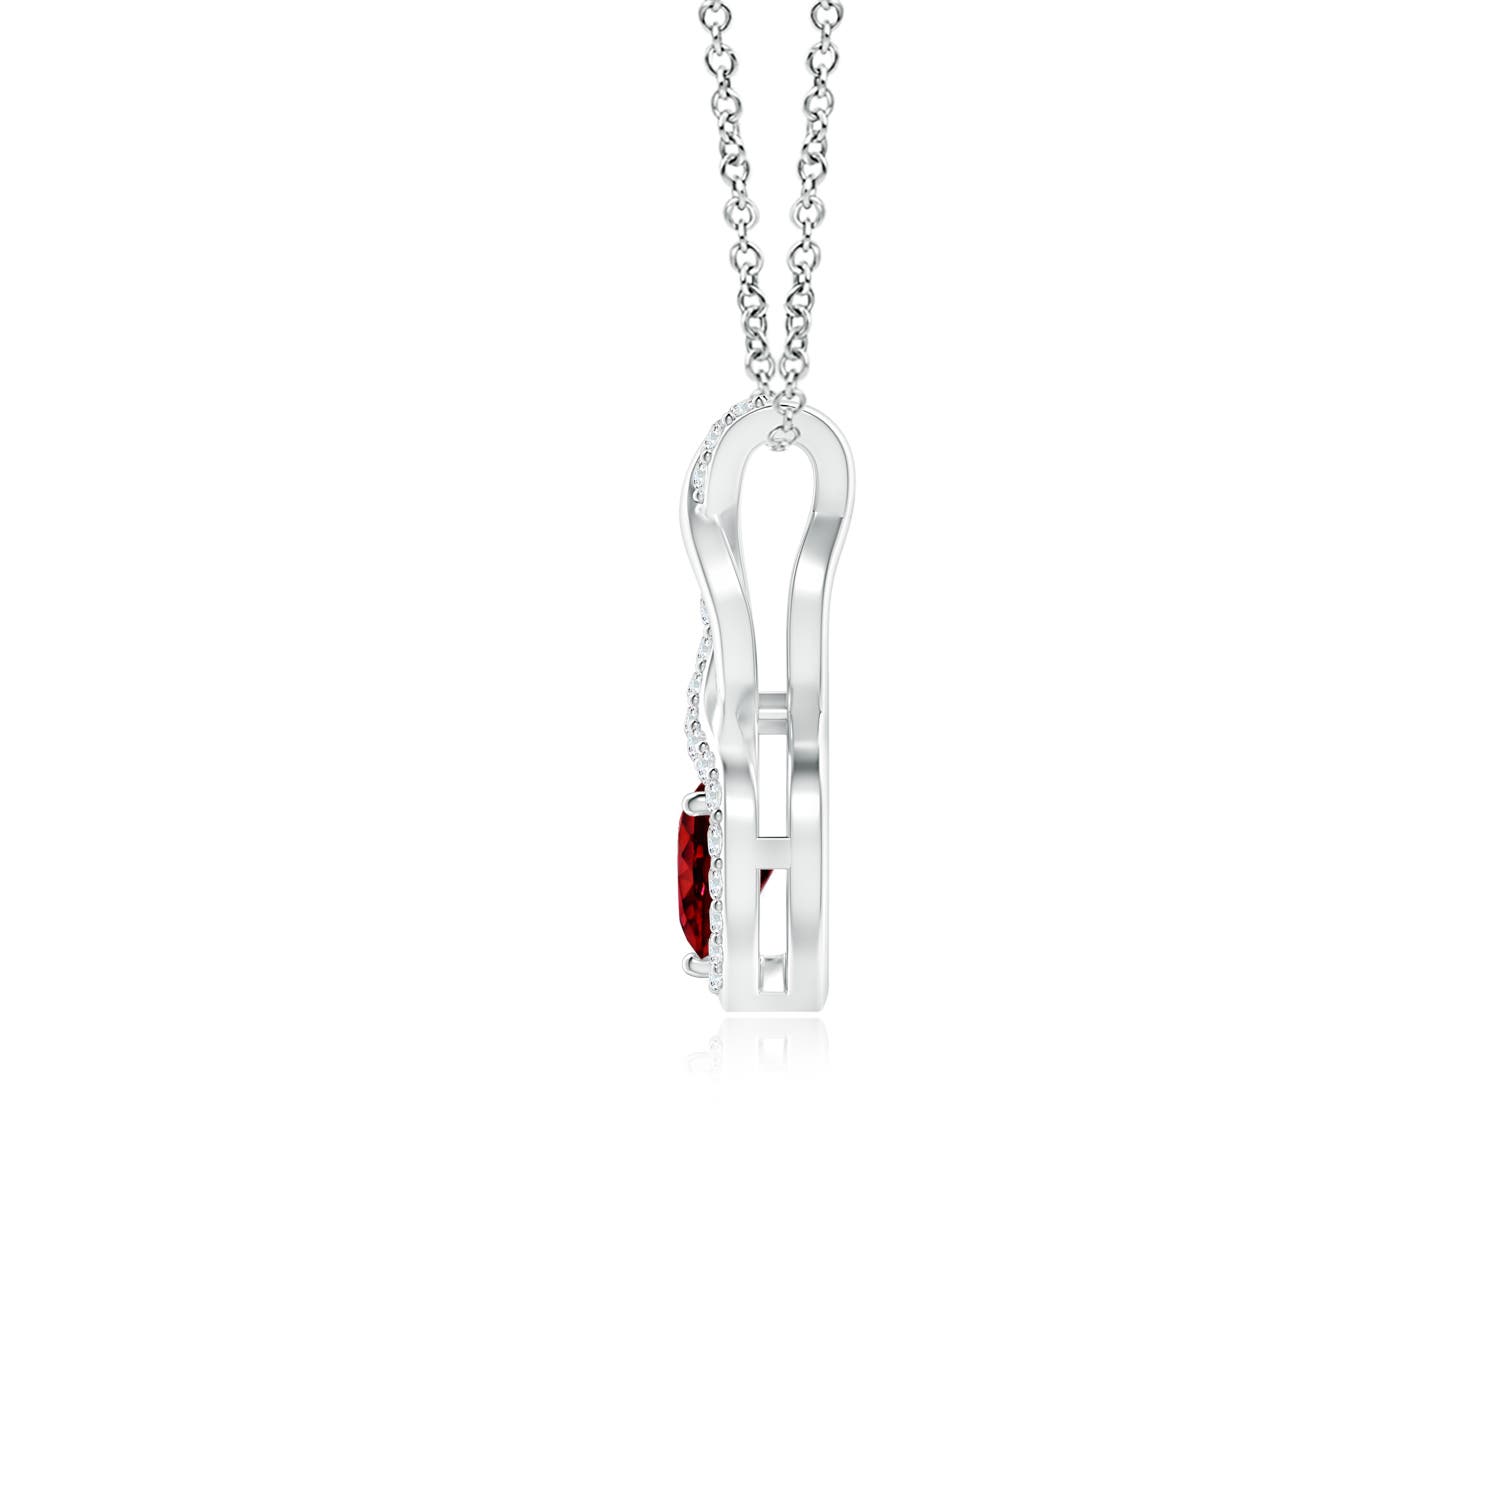 AAAA - Ruby / 0.35 CT / 14 KT White Gold